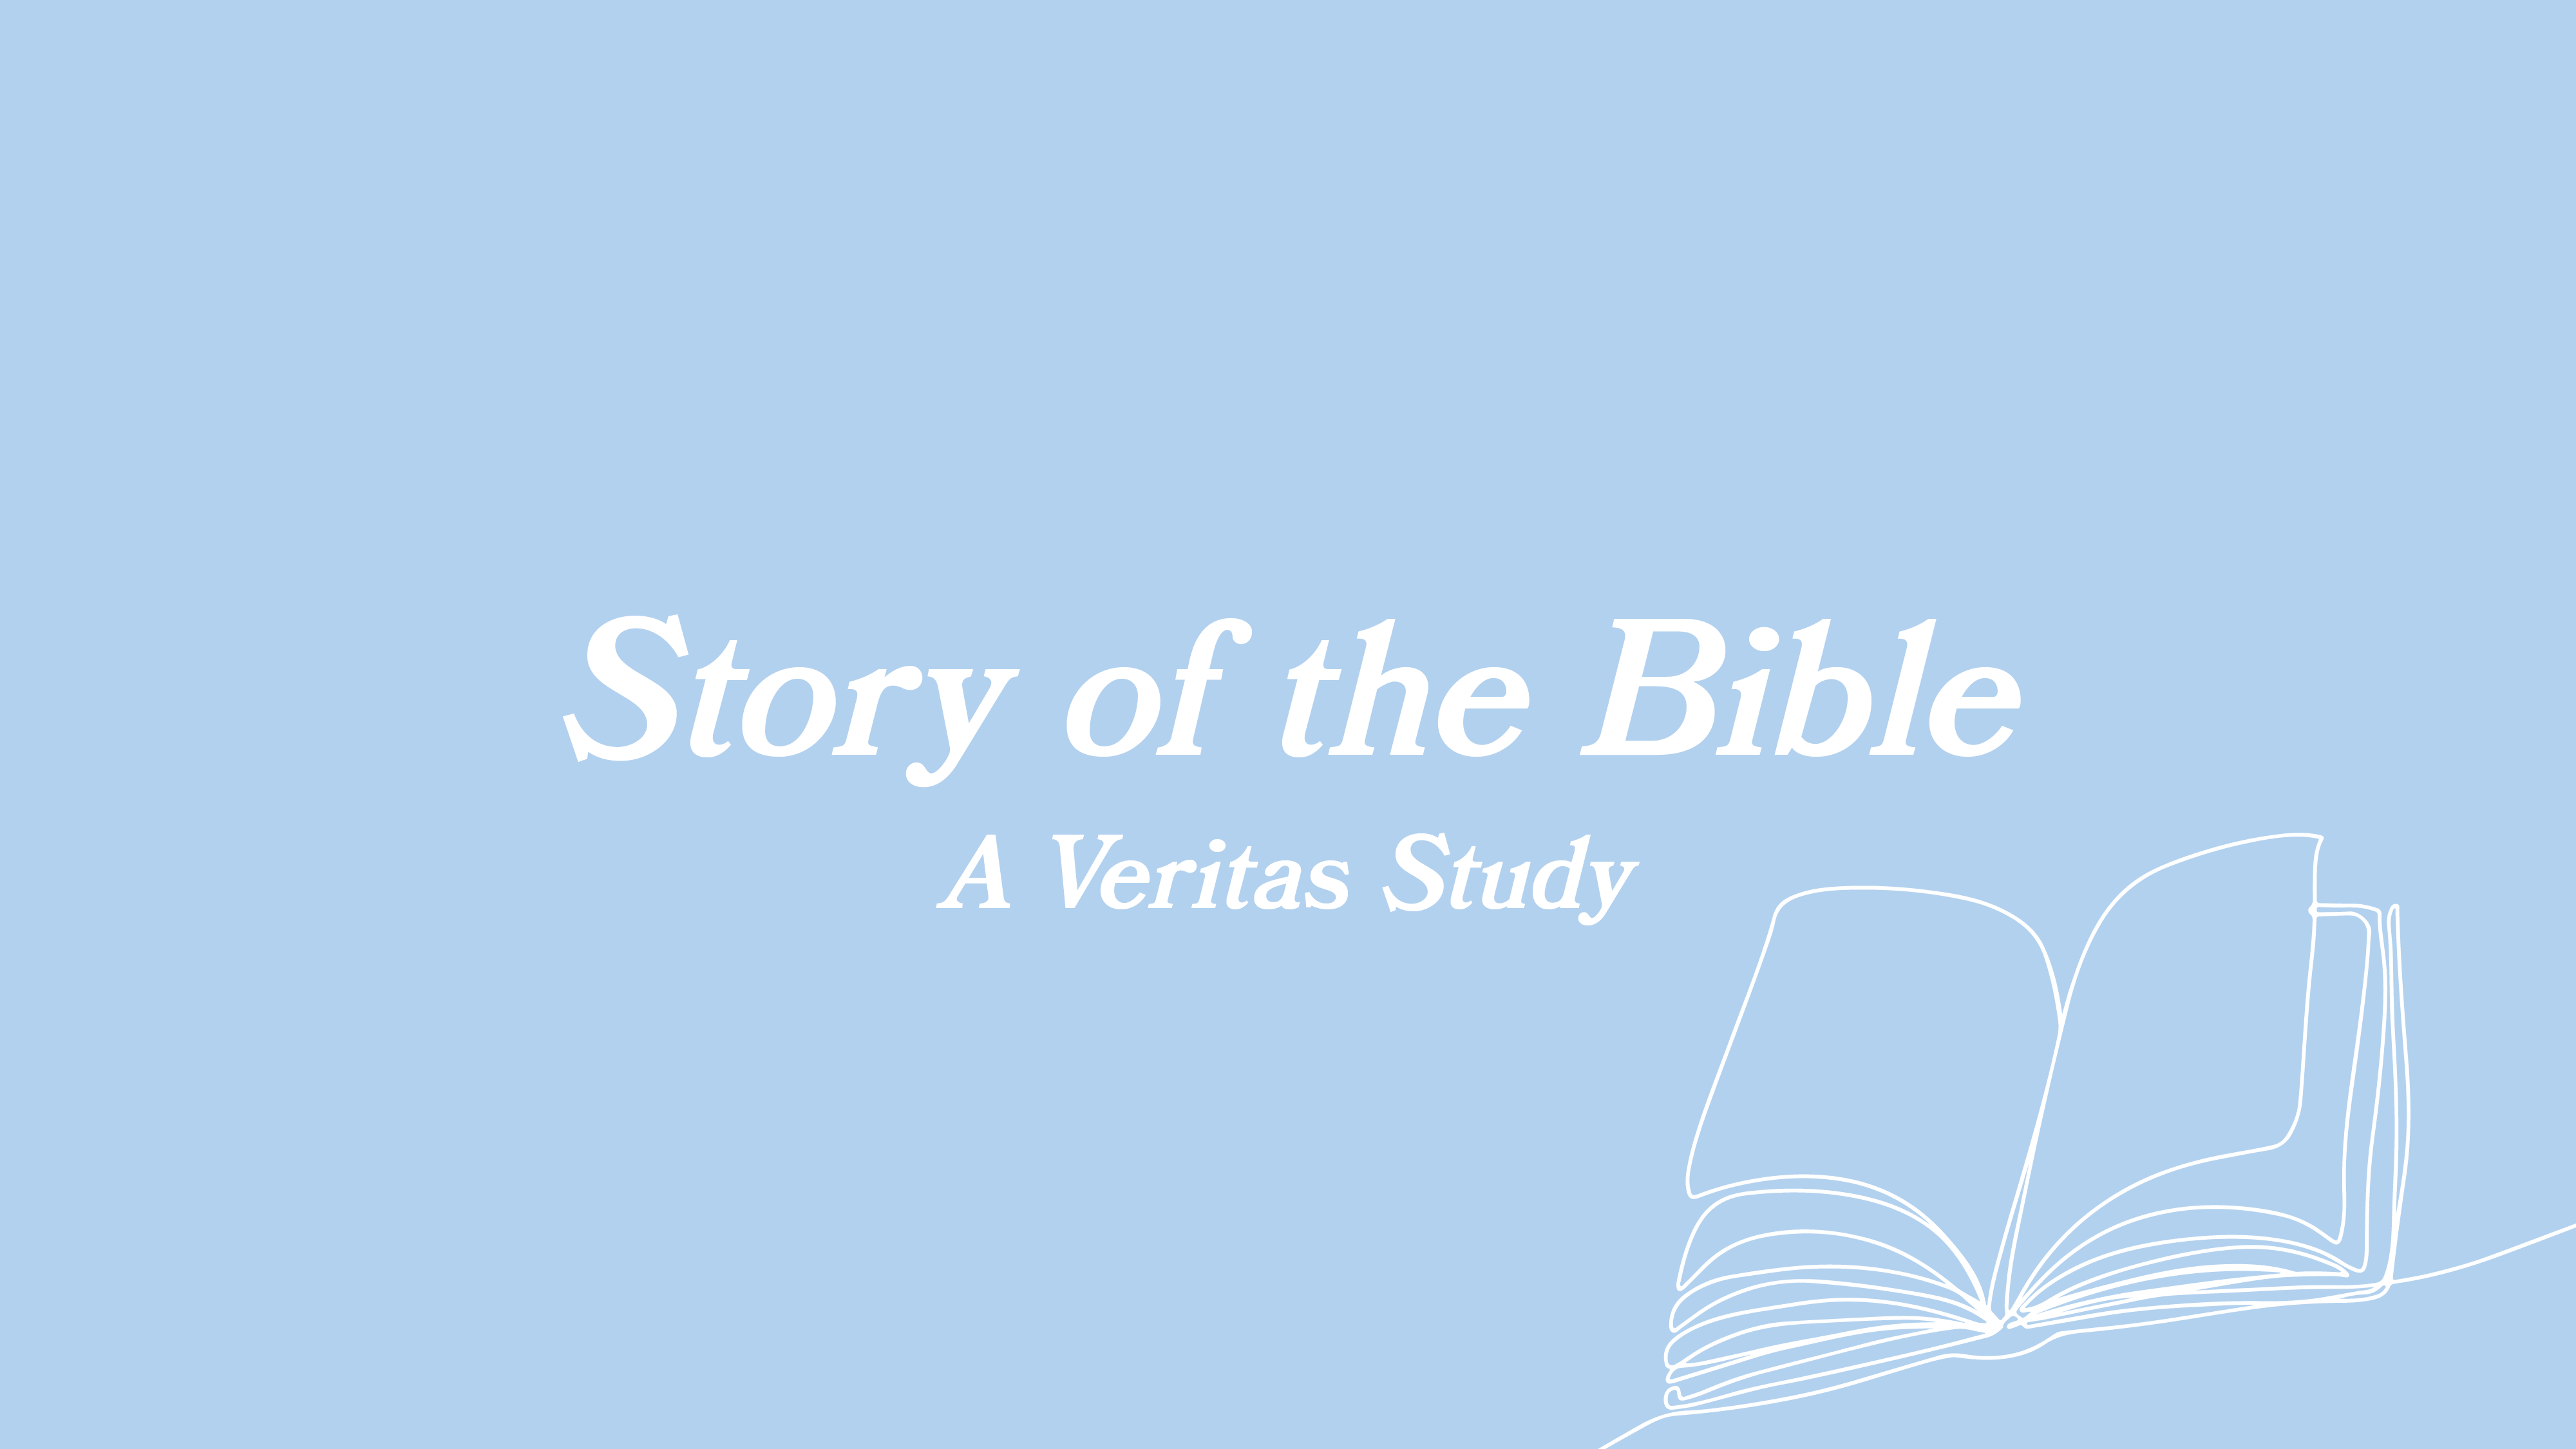 Veritas Study: The Story of the Bible